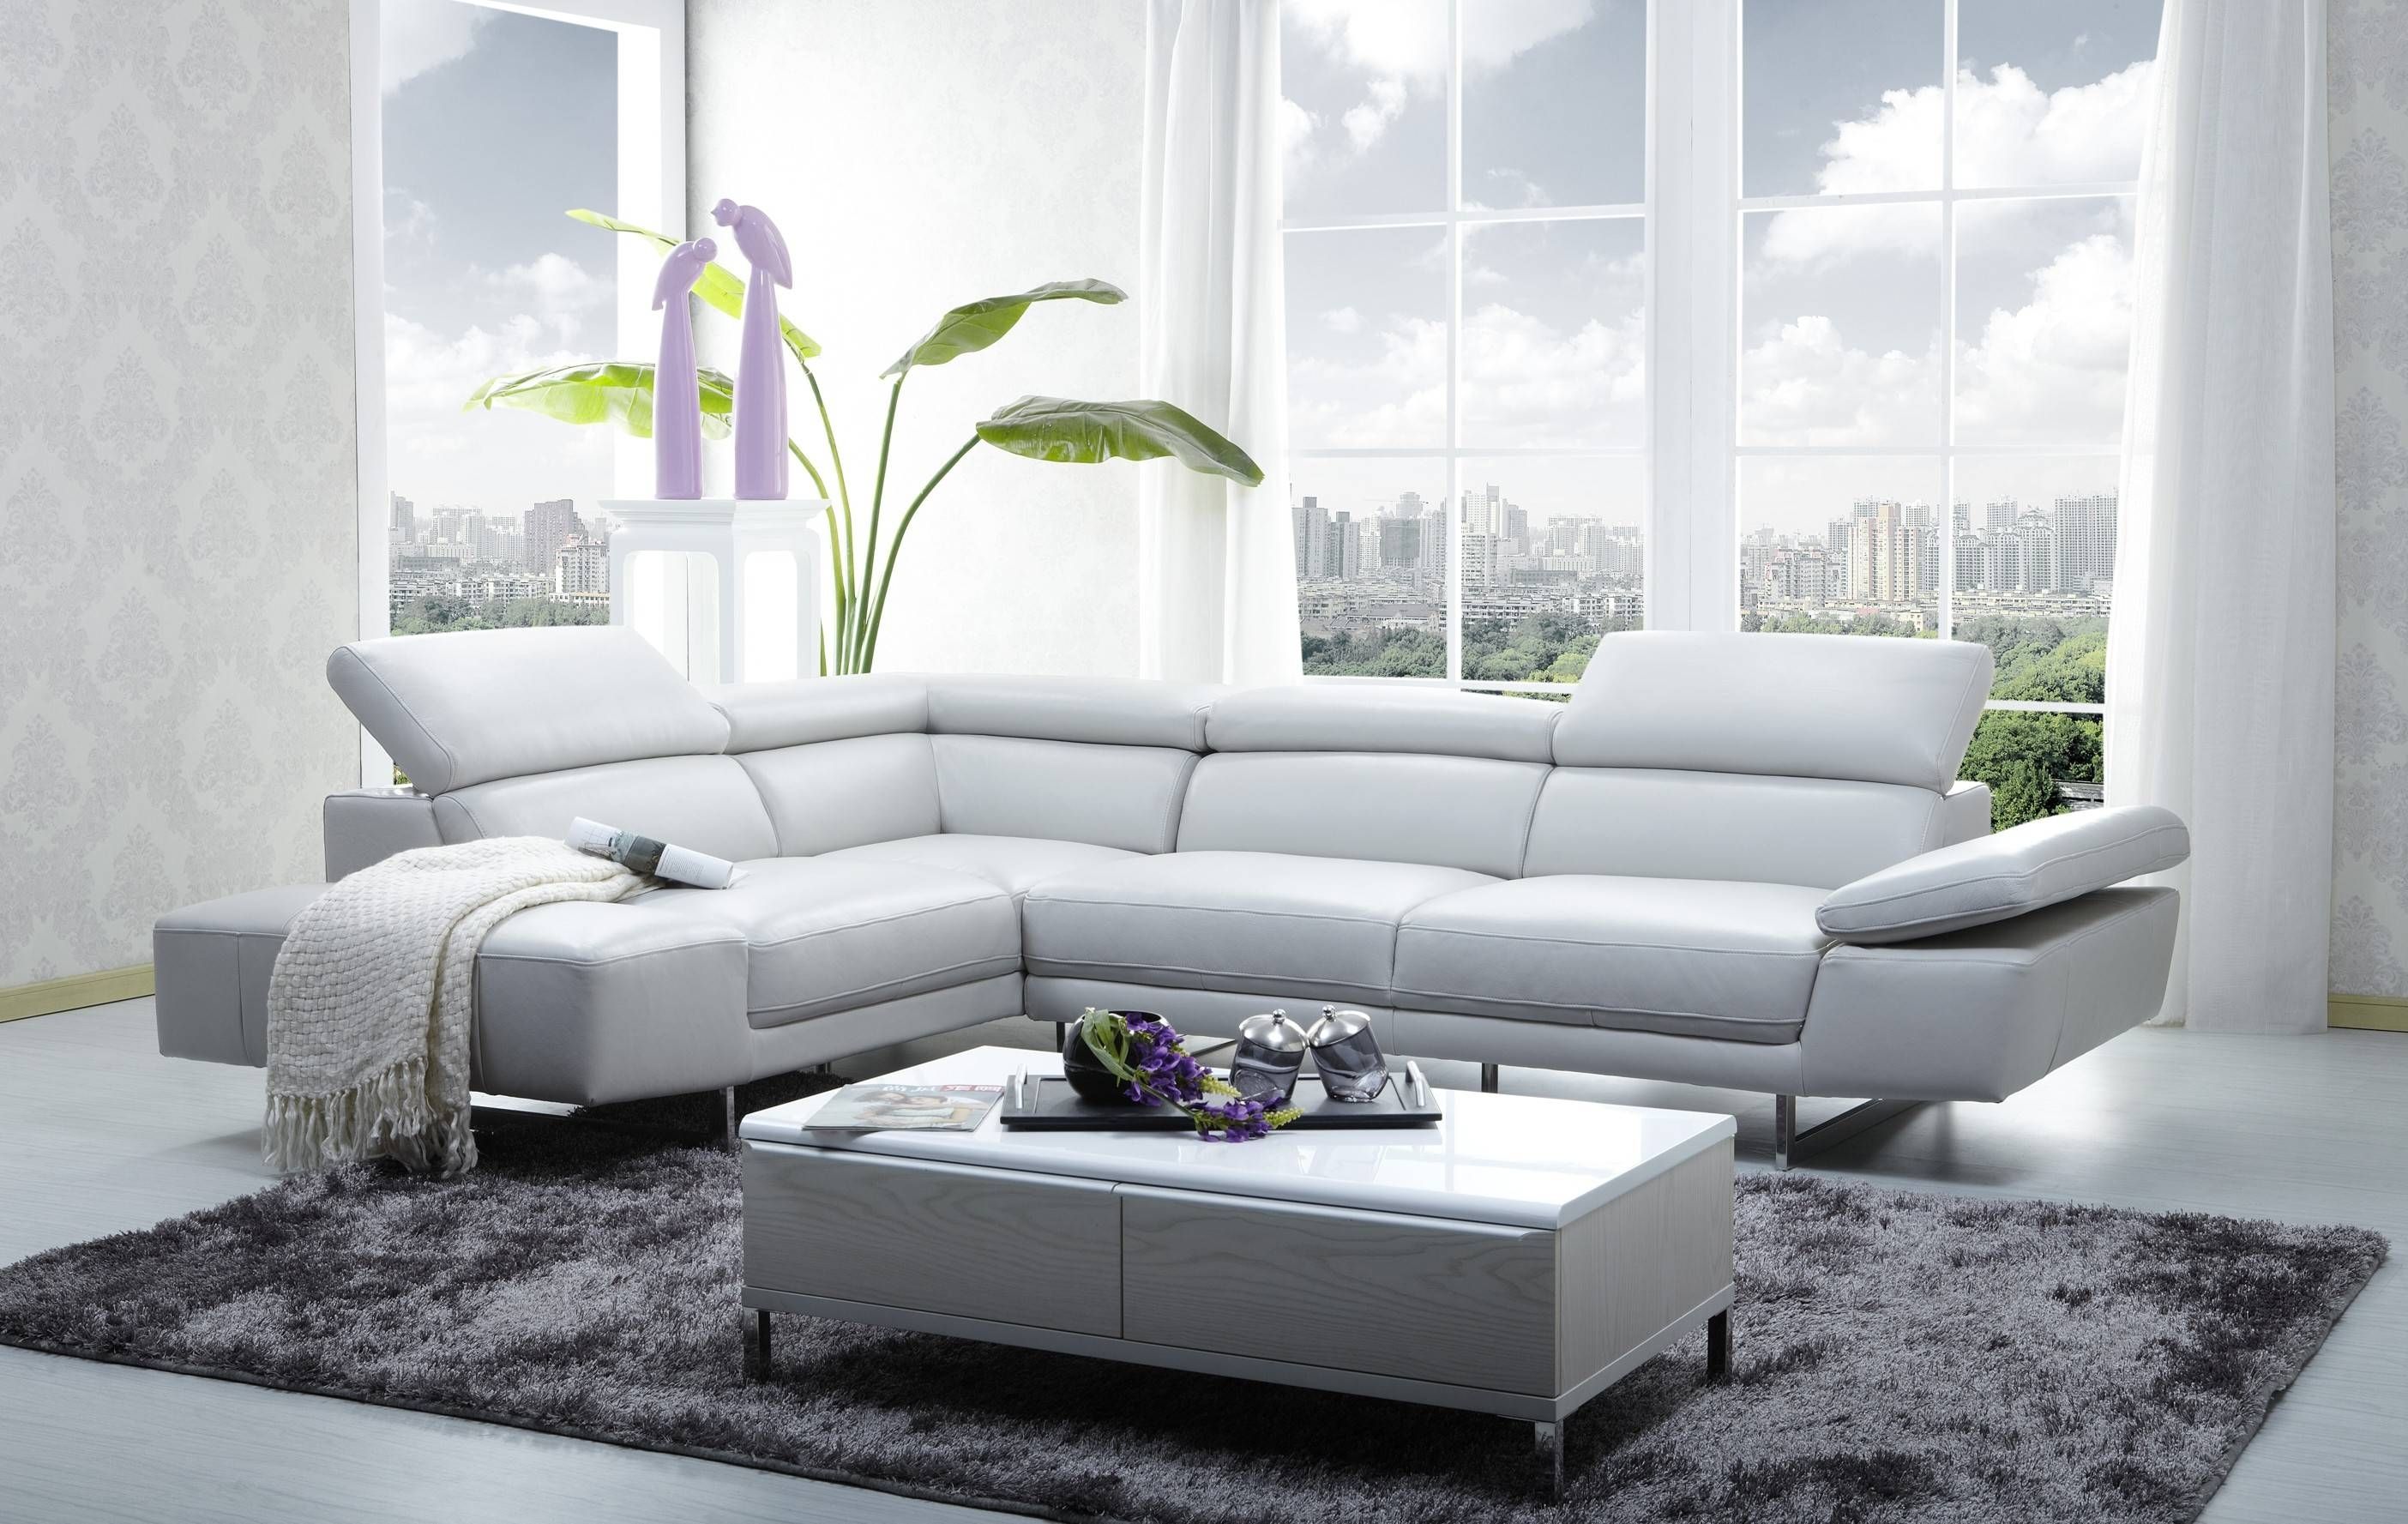 Living Room : Charming White Leather L Shape Sectional Sofa In Narrow Sectional Sofas (View 9 of 15)